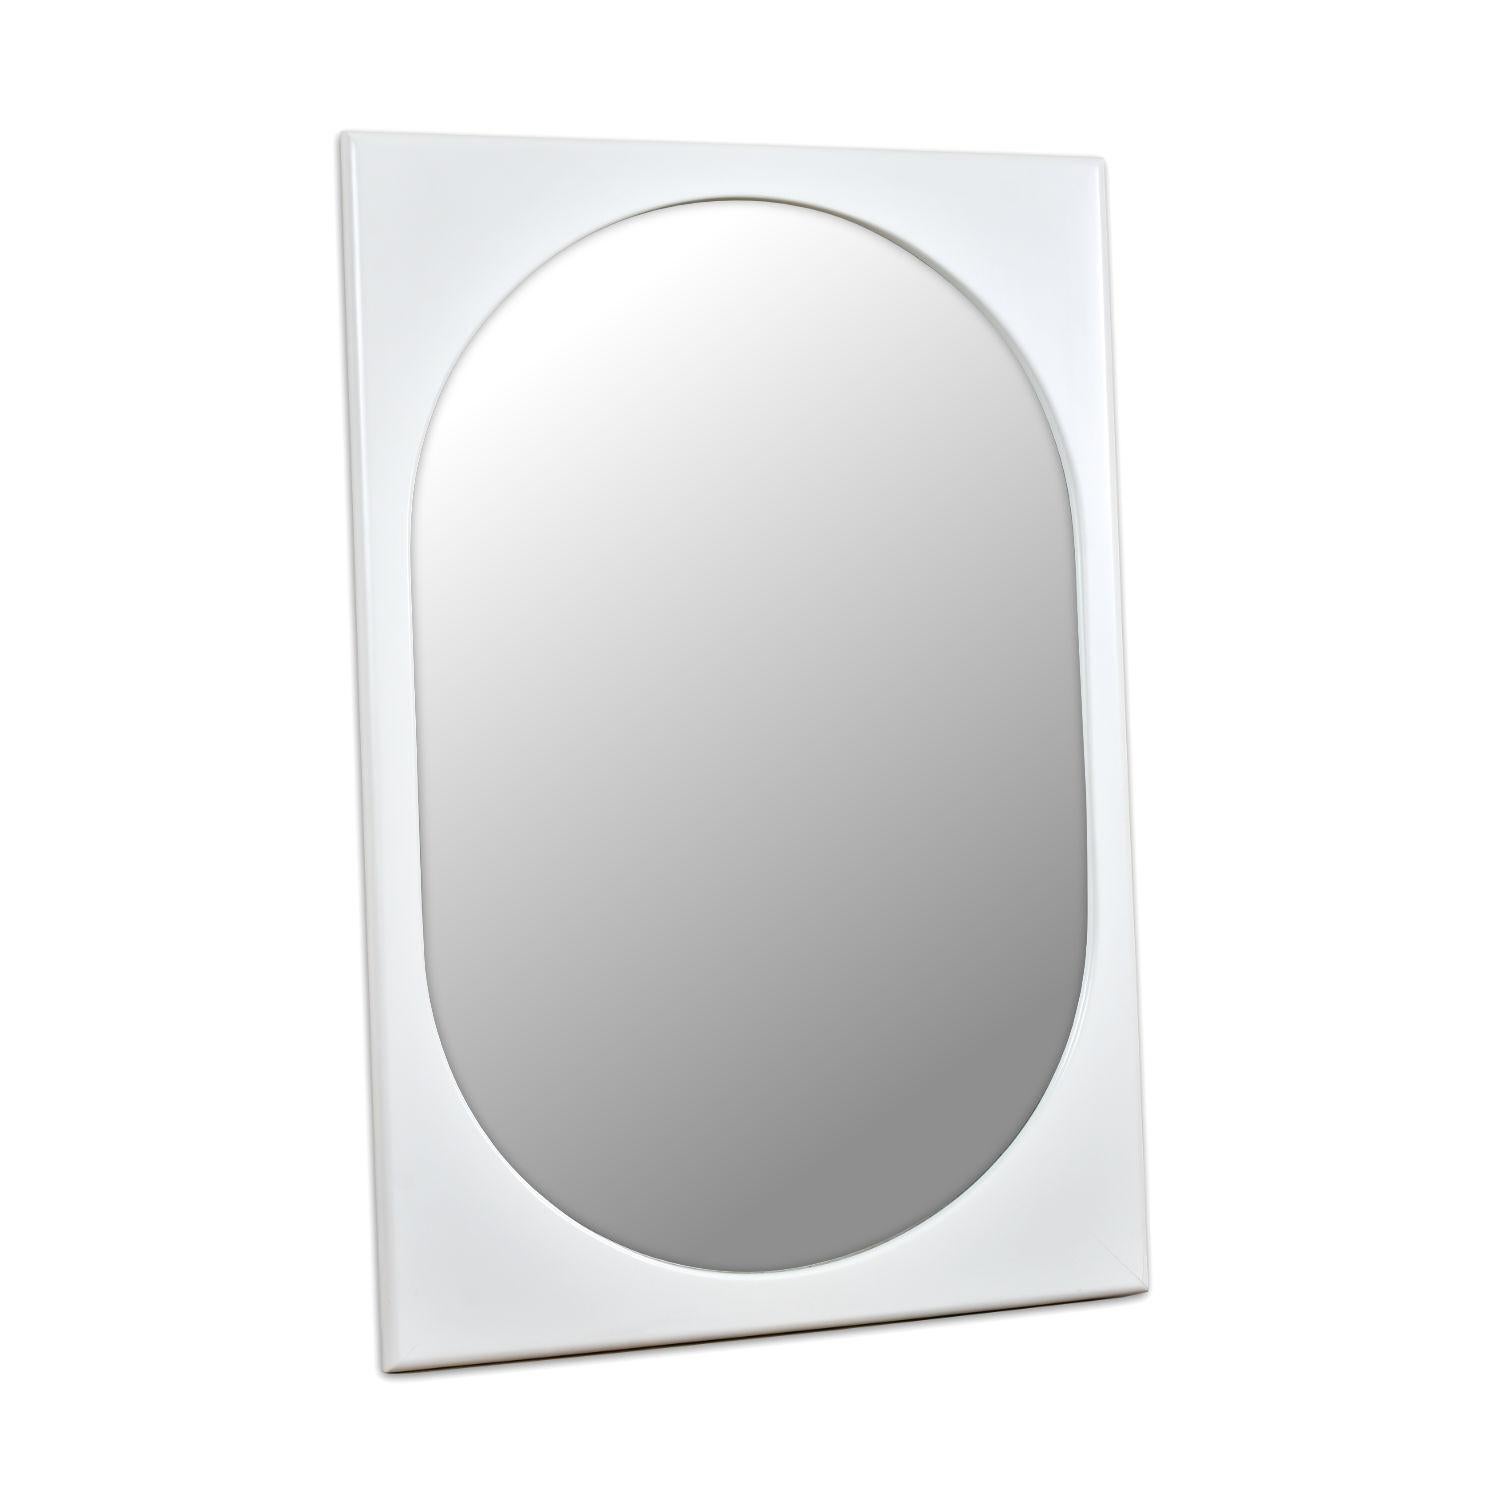 White, modern, wall mirror from Broyhill Premiere's 